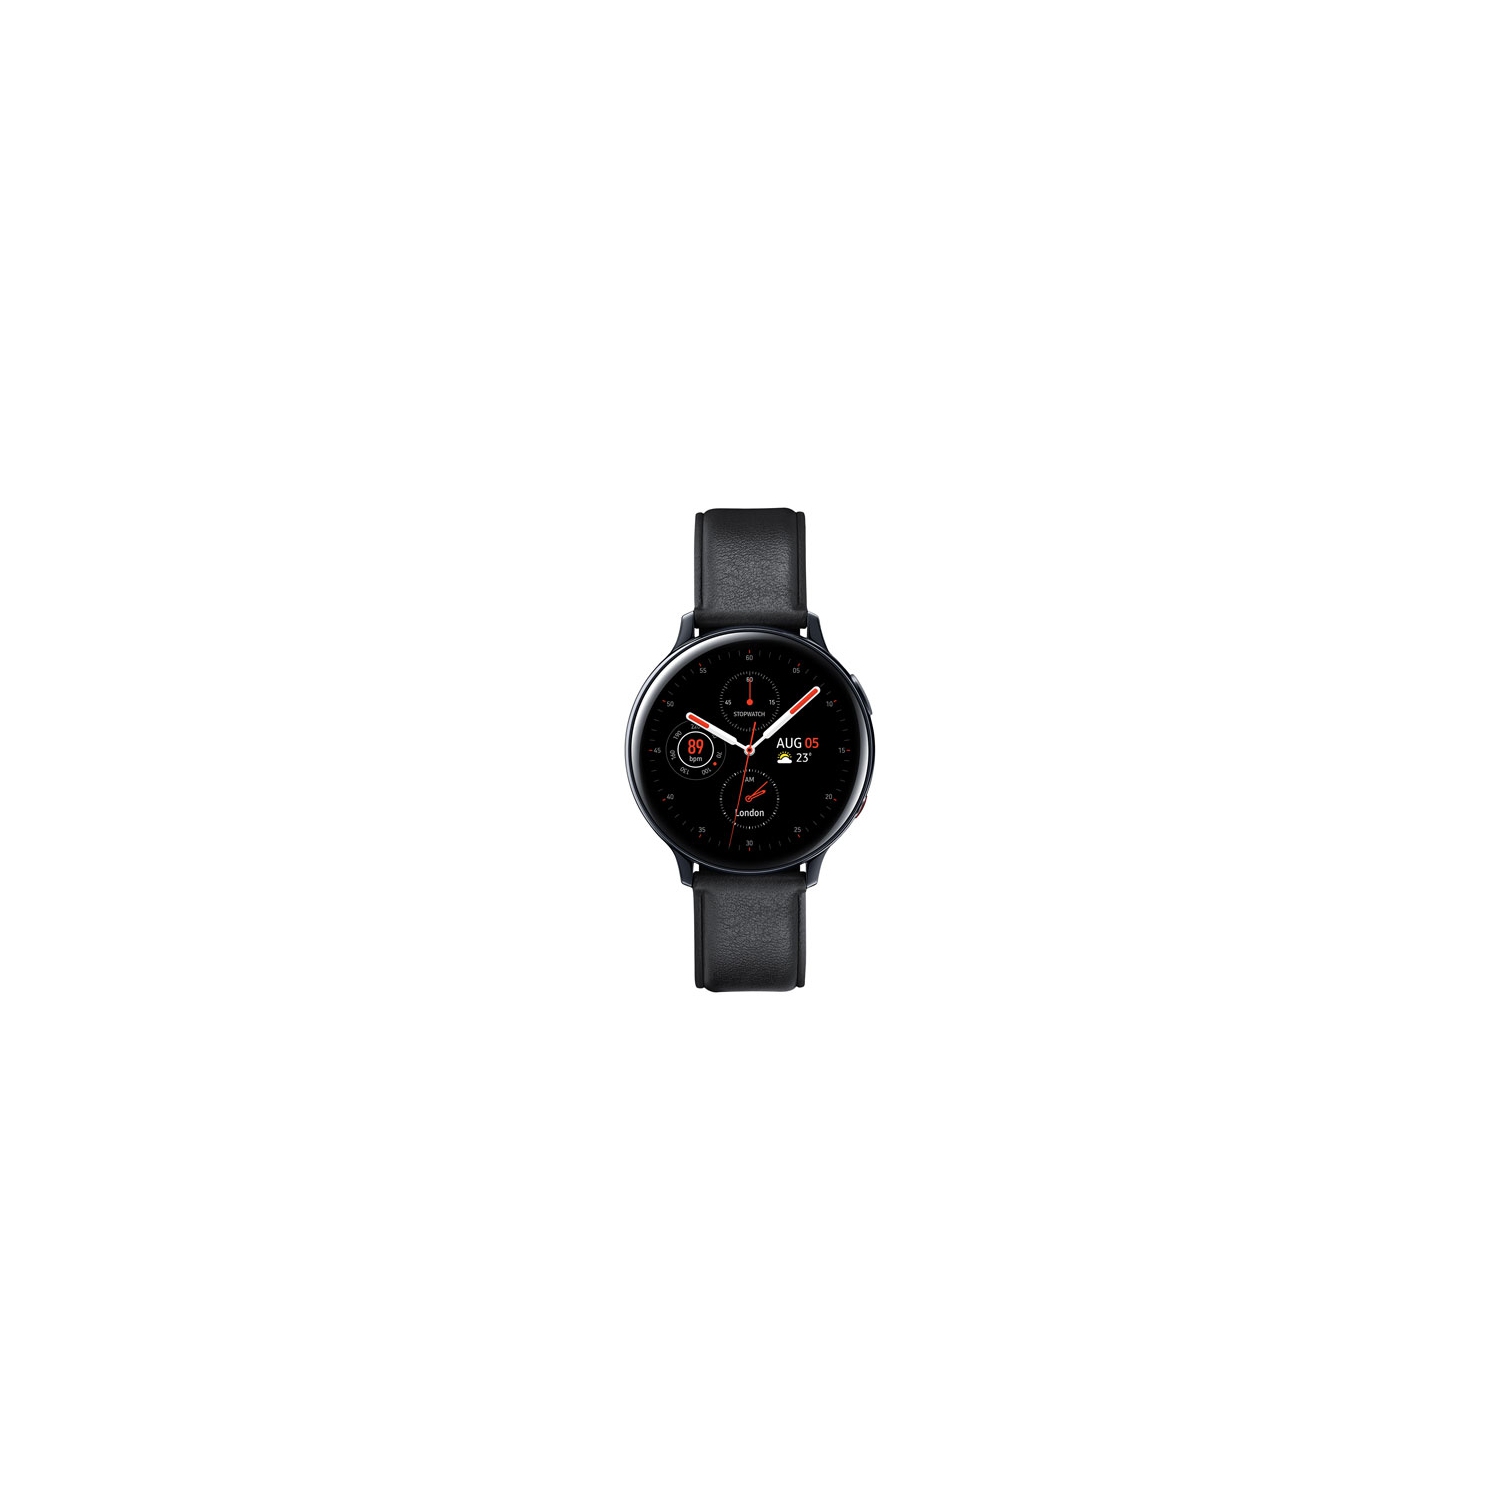 Samsung Galaxy Watch Active2 44mm LTE Smartwatch with Heart Rate Monitor - Black - Open Box